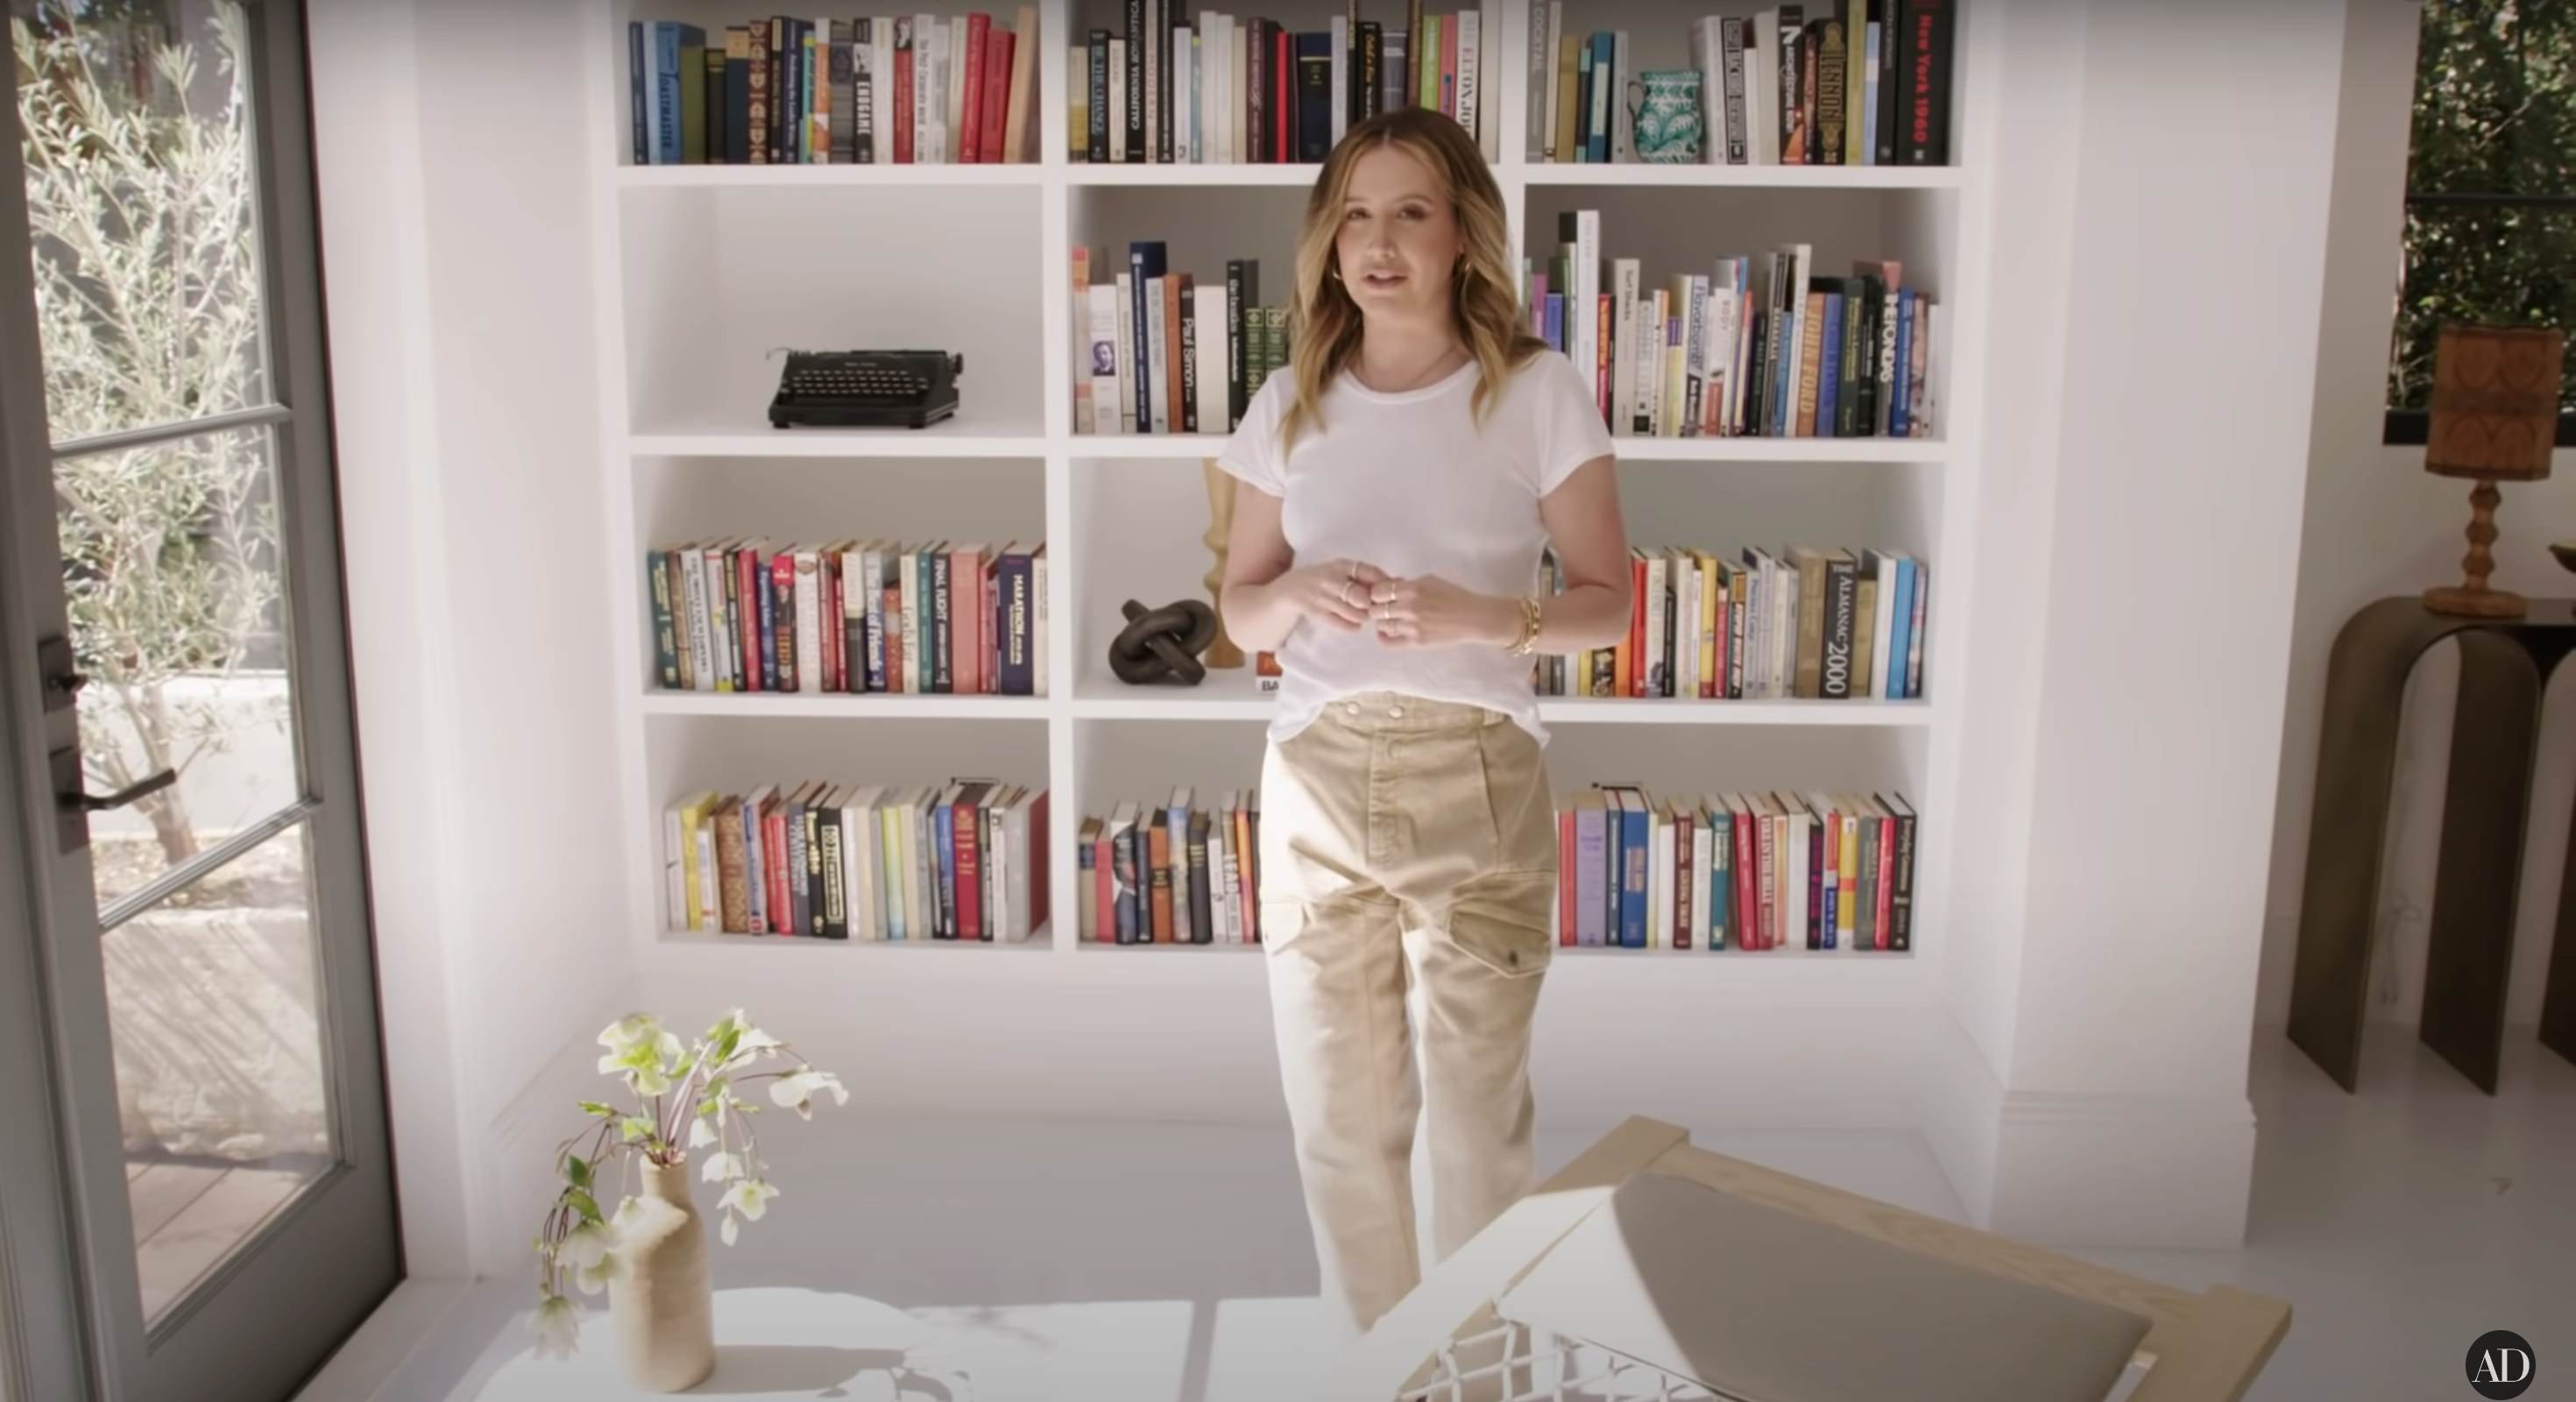 Ashley standing by a desk with a bookshelf behind her, wearing a casual top and satin trousers